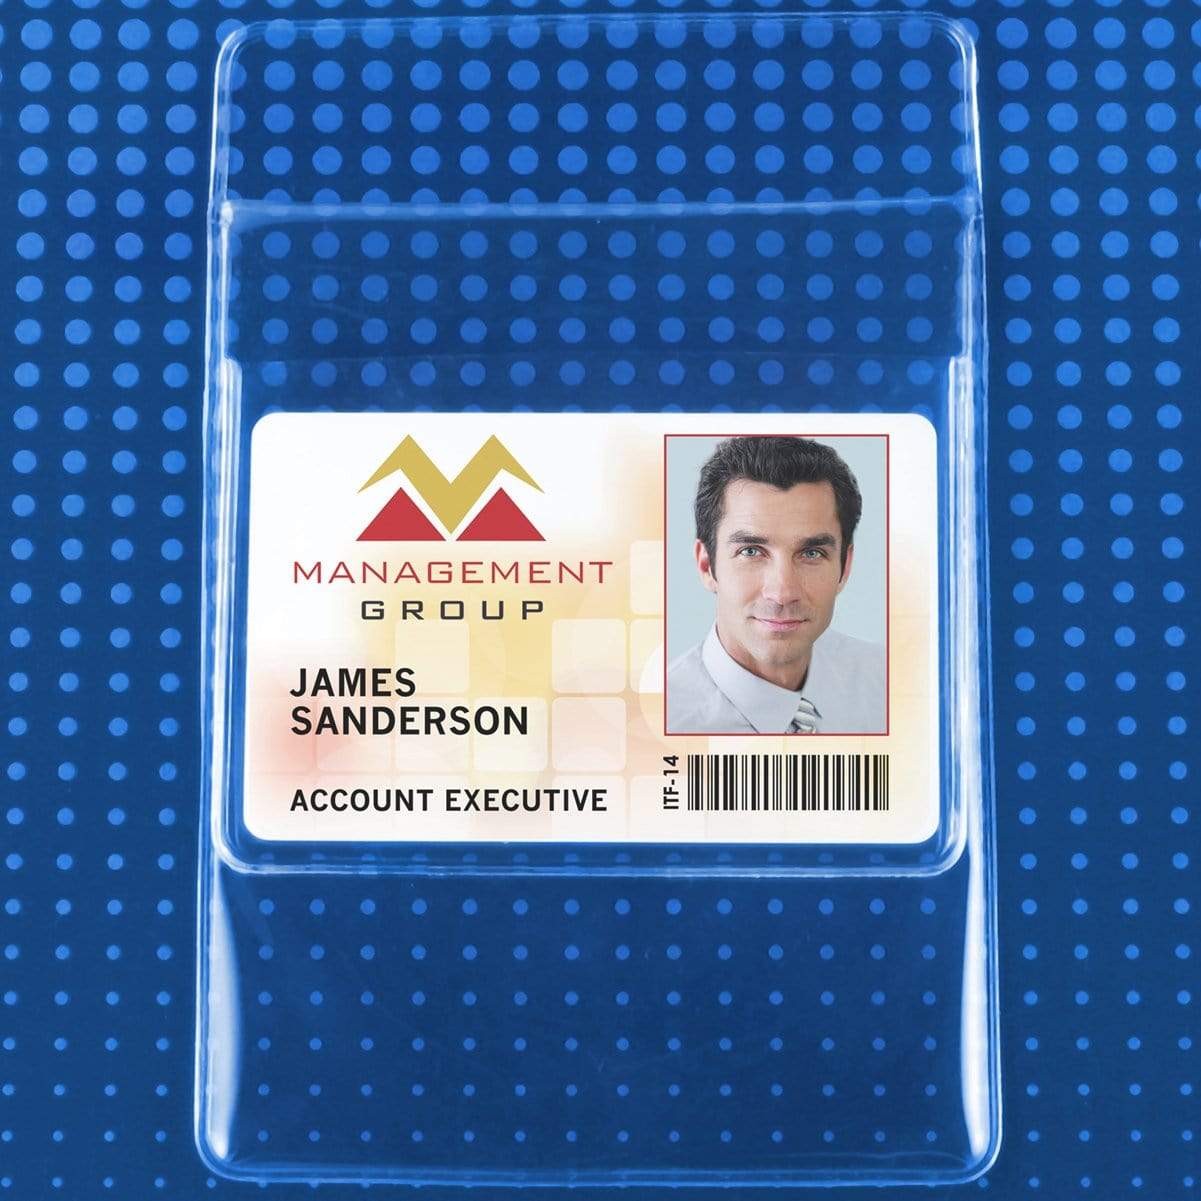 Photo of a Clear Vinyl Pocket Protector With ID Badge Holder (P/N PPL63X) displaying the logo for "Management Group," a photo of a man in a suit, the name James Sanderson, the title Account Executive, and a barcode at the bottom right. The durable vinyl material ensures long-lasting use.